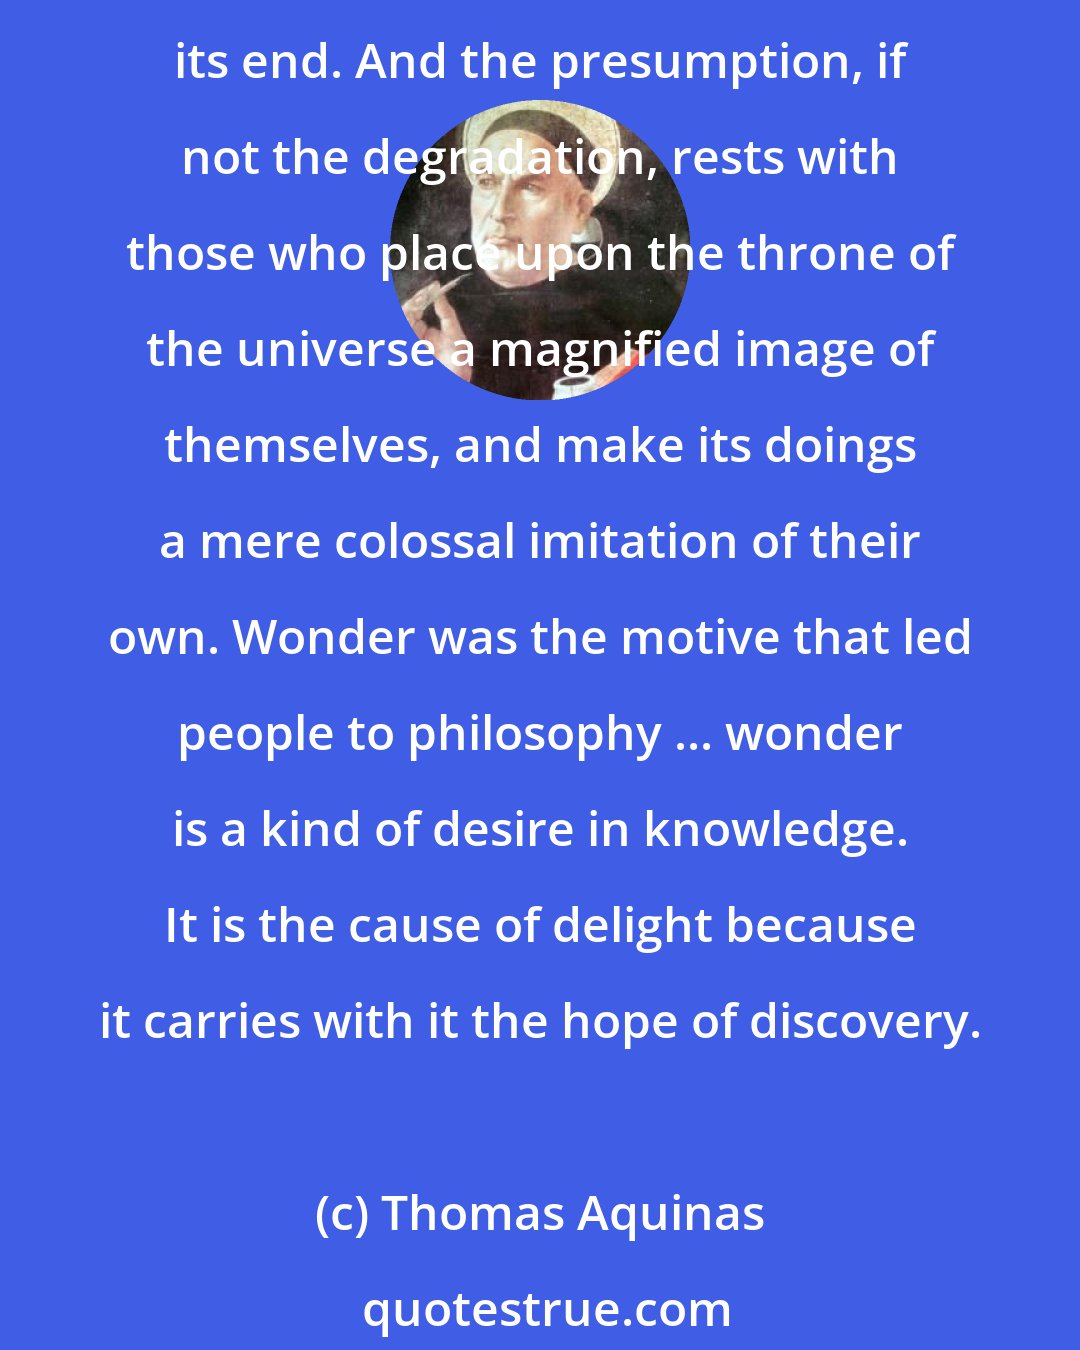 Thomas Aquinas: Without the suitable conditions life could not exist. But both life and its conditions set forth the operations of inscrutable Power. We know not its origin; we know not its end. And the presumption, if not the degradation, rests with those who place upon the throne of the universe a magnified image of themselves, and make its doings a mere colossal imitation of their own. Wonder was the motive that led people to philosophy ... wonder is a kind of desire in knowledge. It is the cause of delight because it carries with it the hope of discovery.